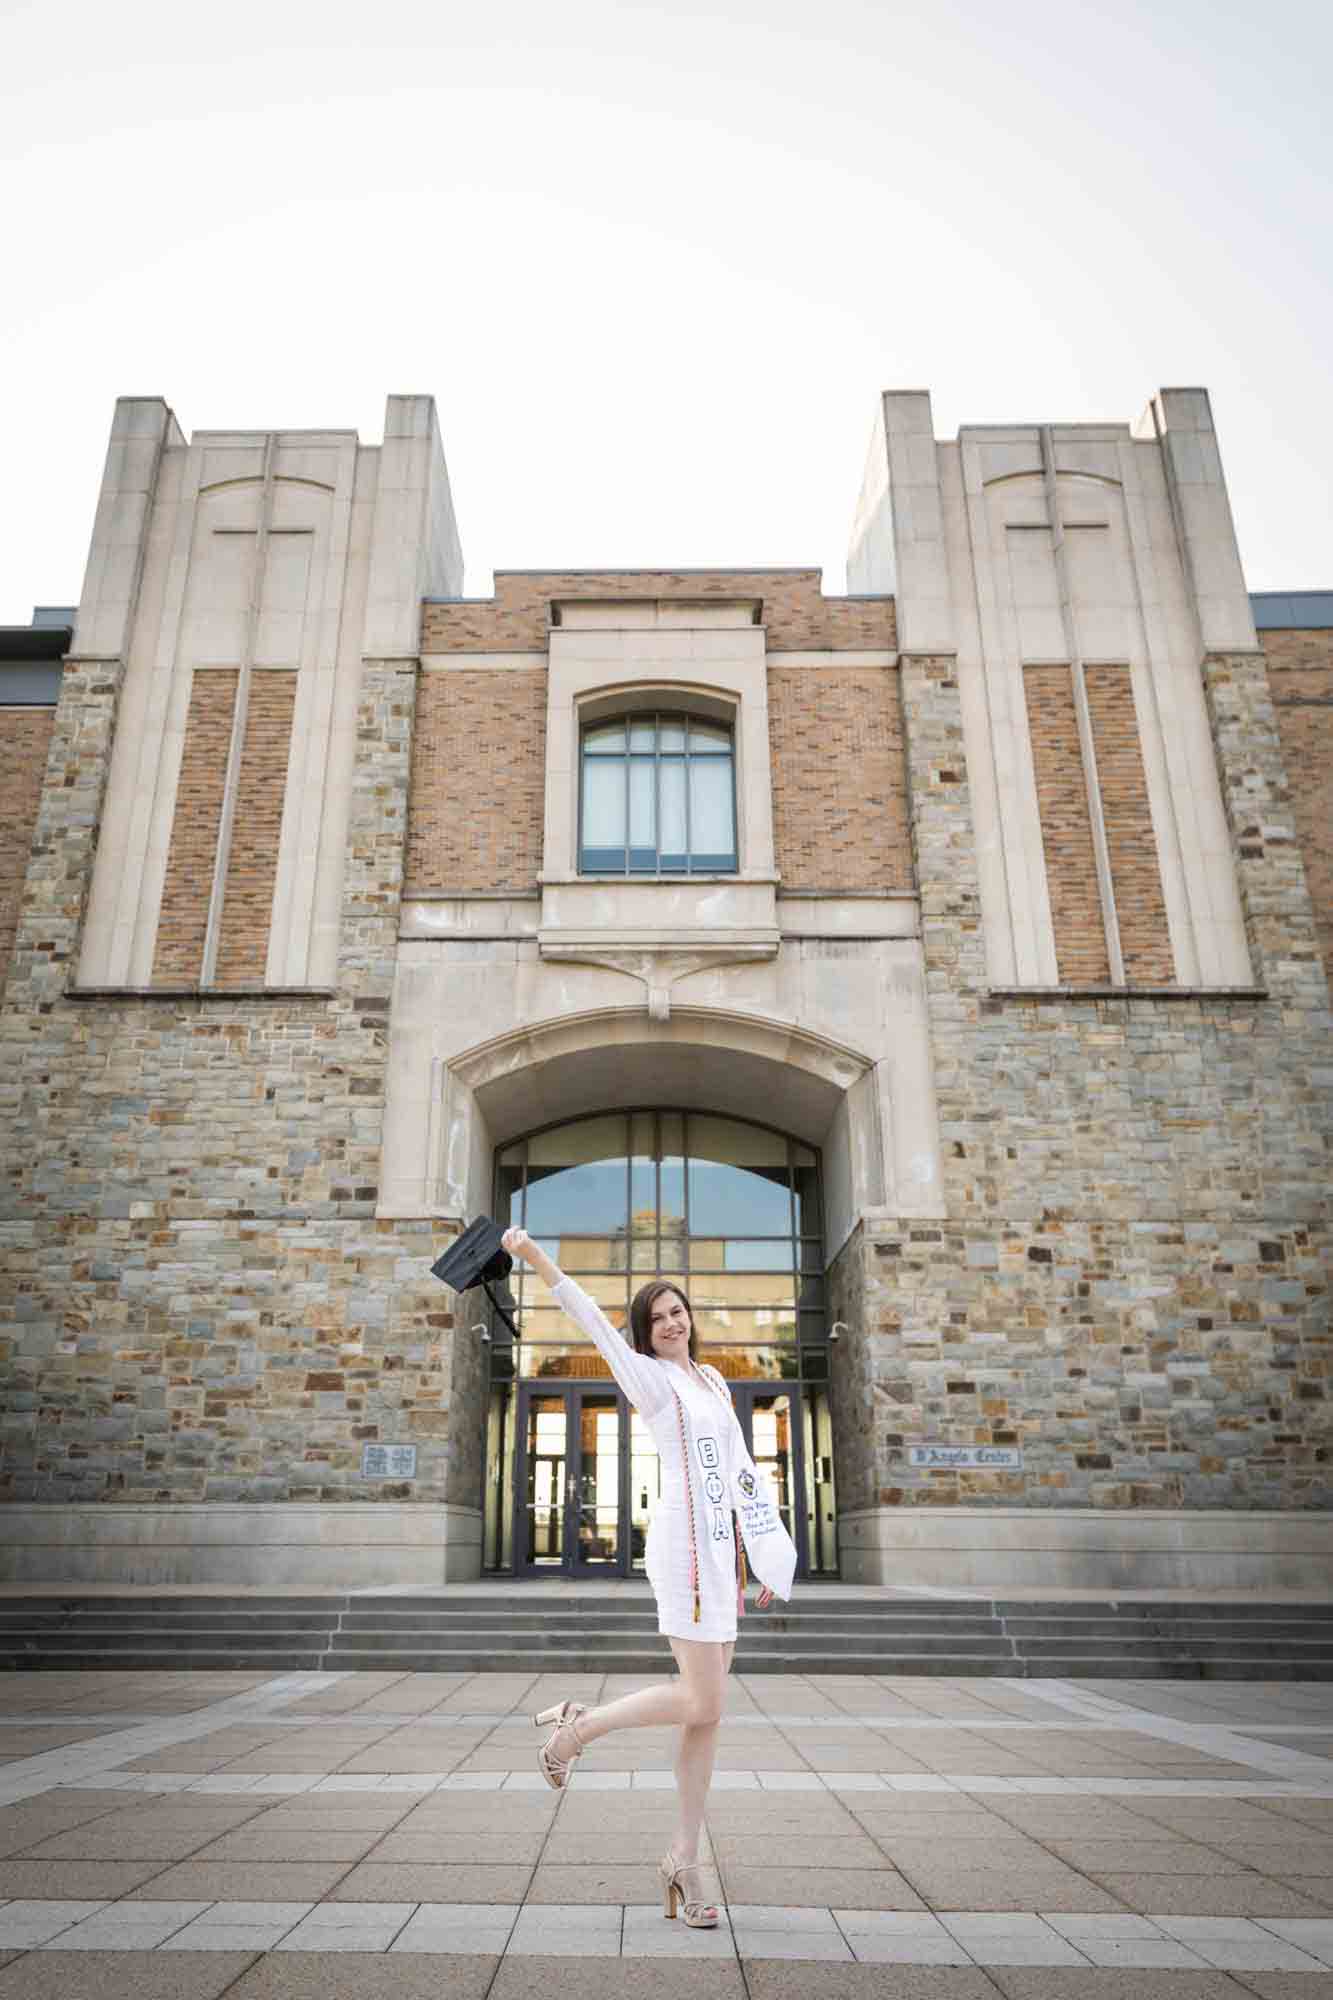 Female graduate wearing white dress and holding cap in the air during a St. John’s University graduate portrait session